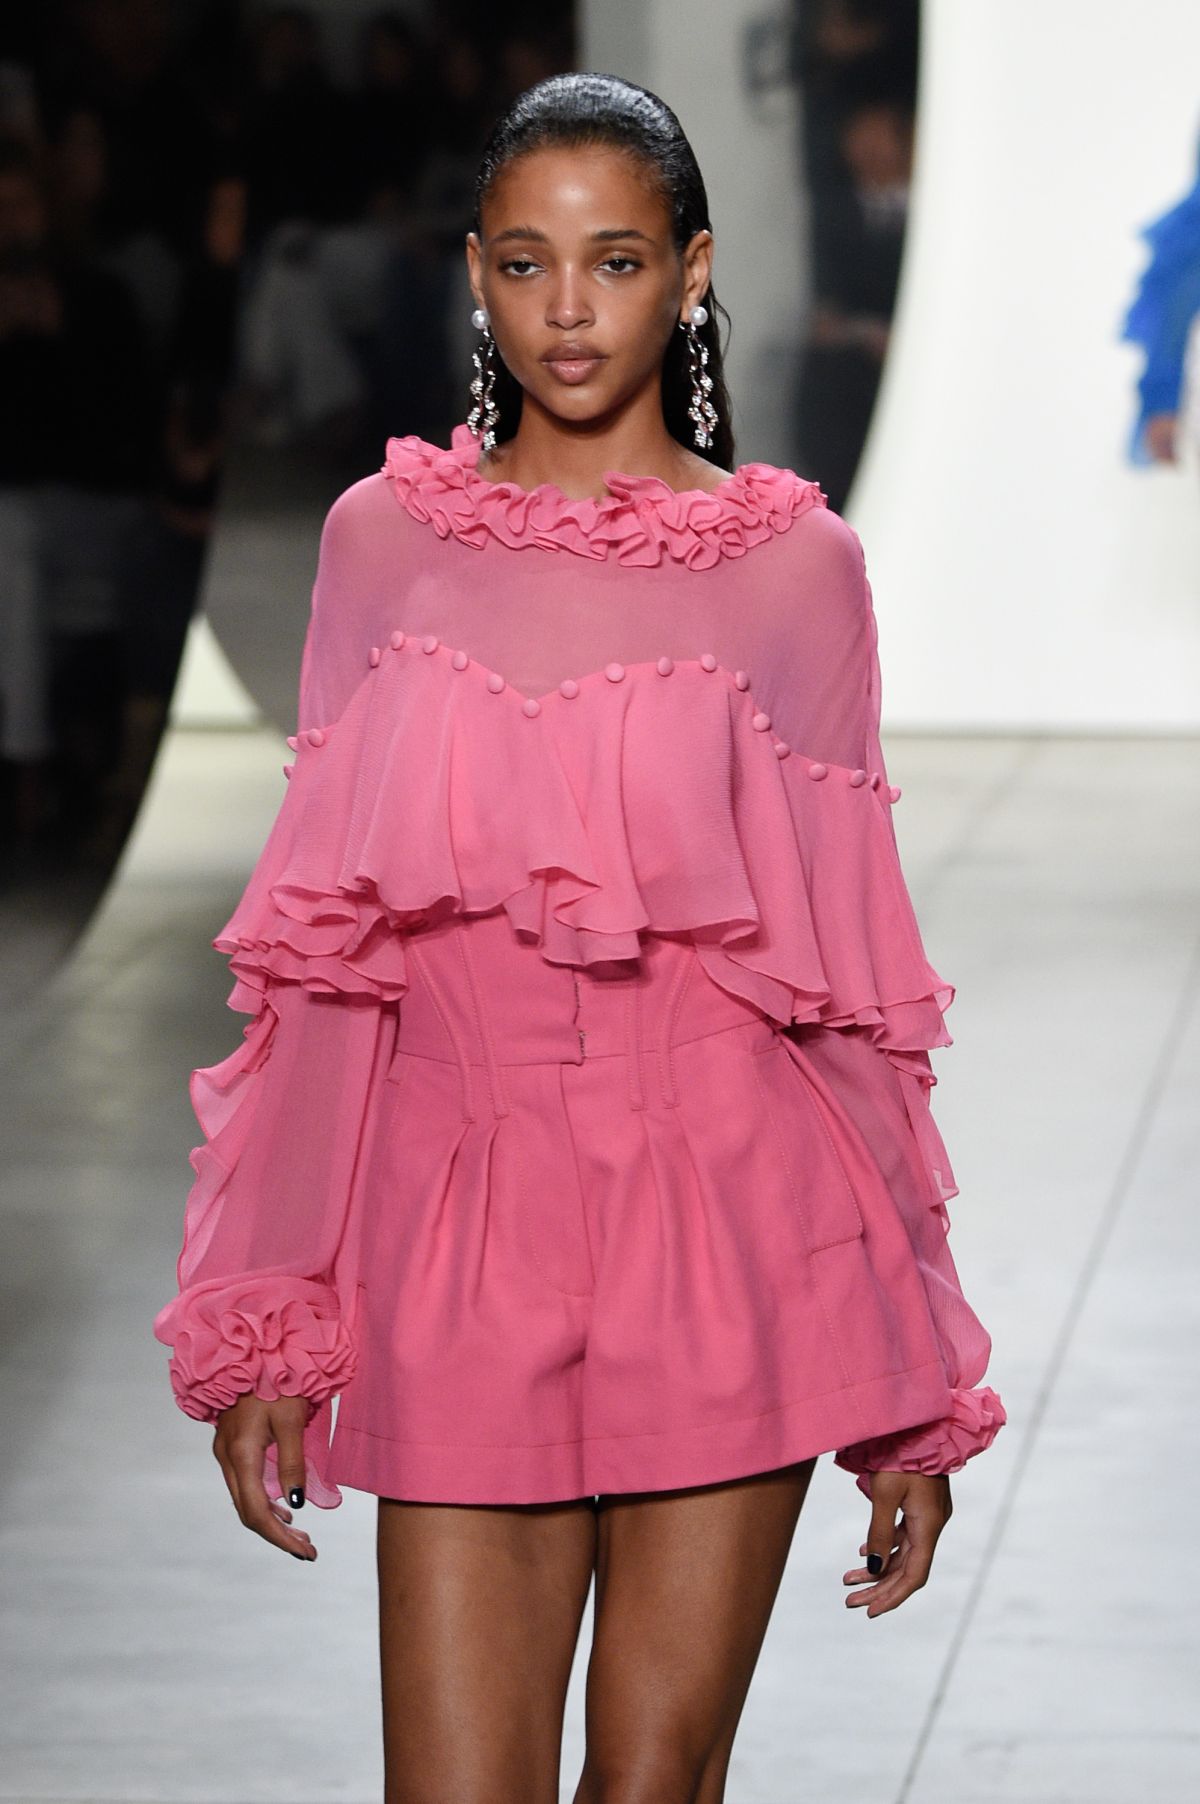 See All The Black Hair And Hairstyles On The Runway For Fashion Month